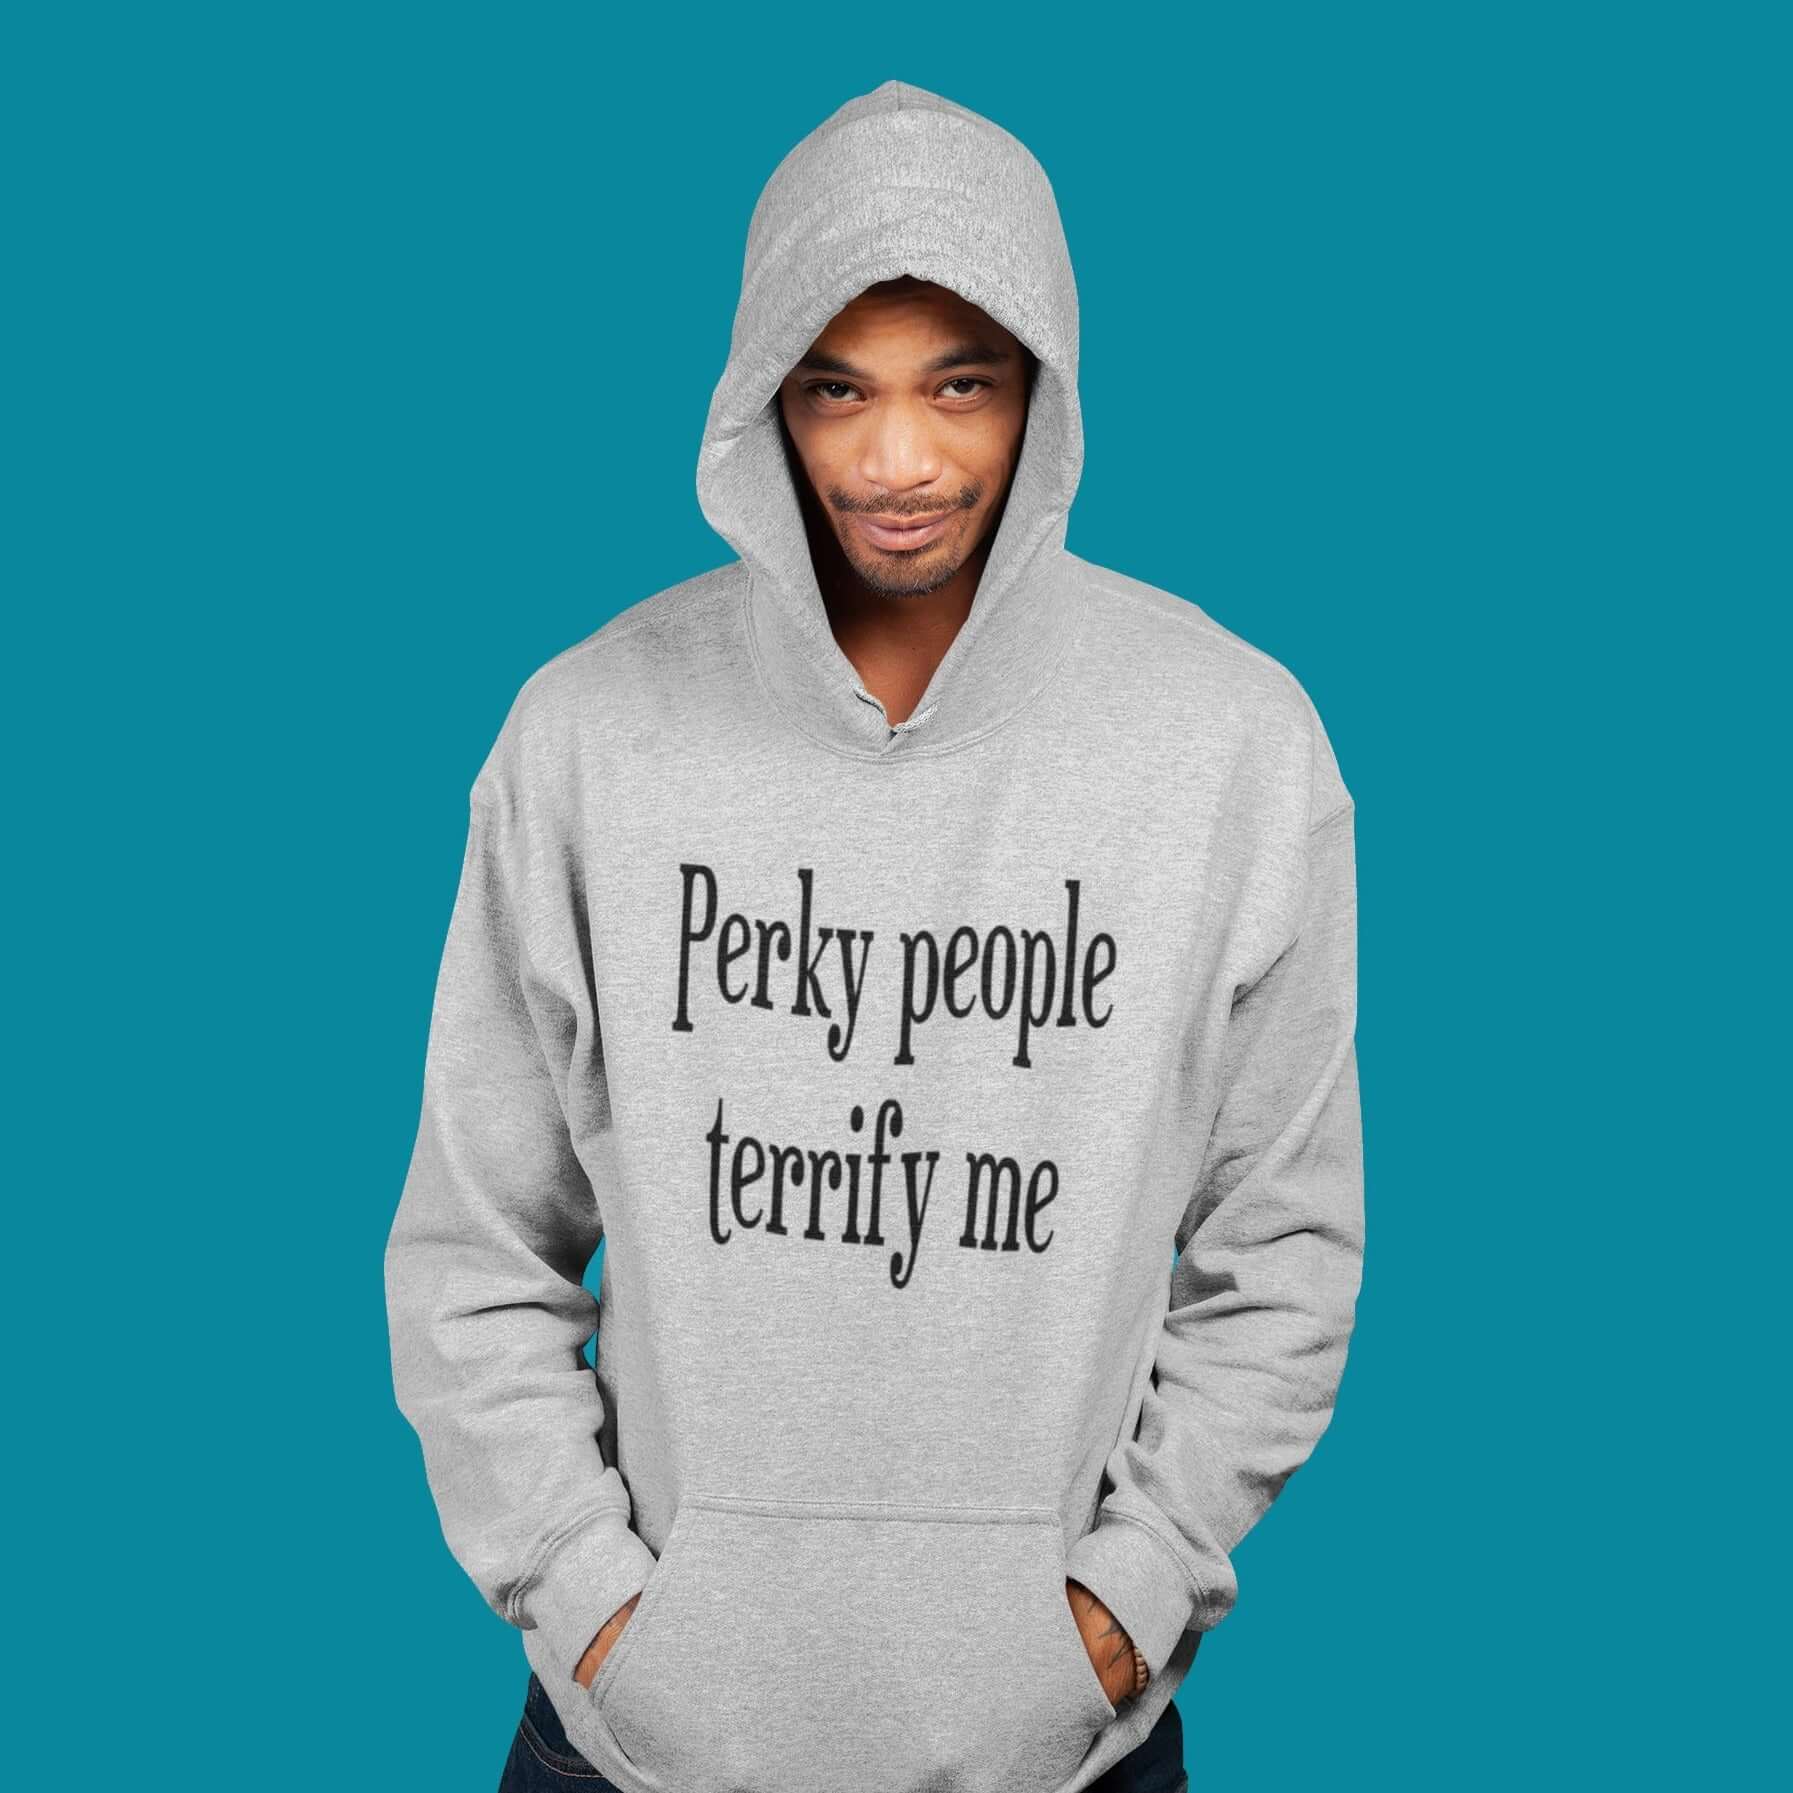 Man wearing a light sport grey hoodie sweatshirt with the phrase Perky people terrify me printed on the front.